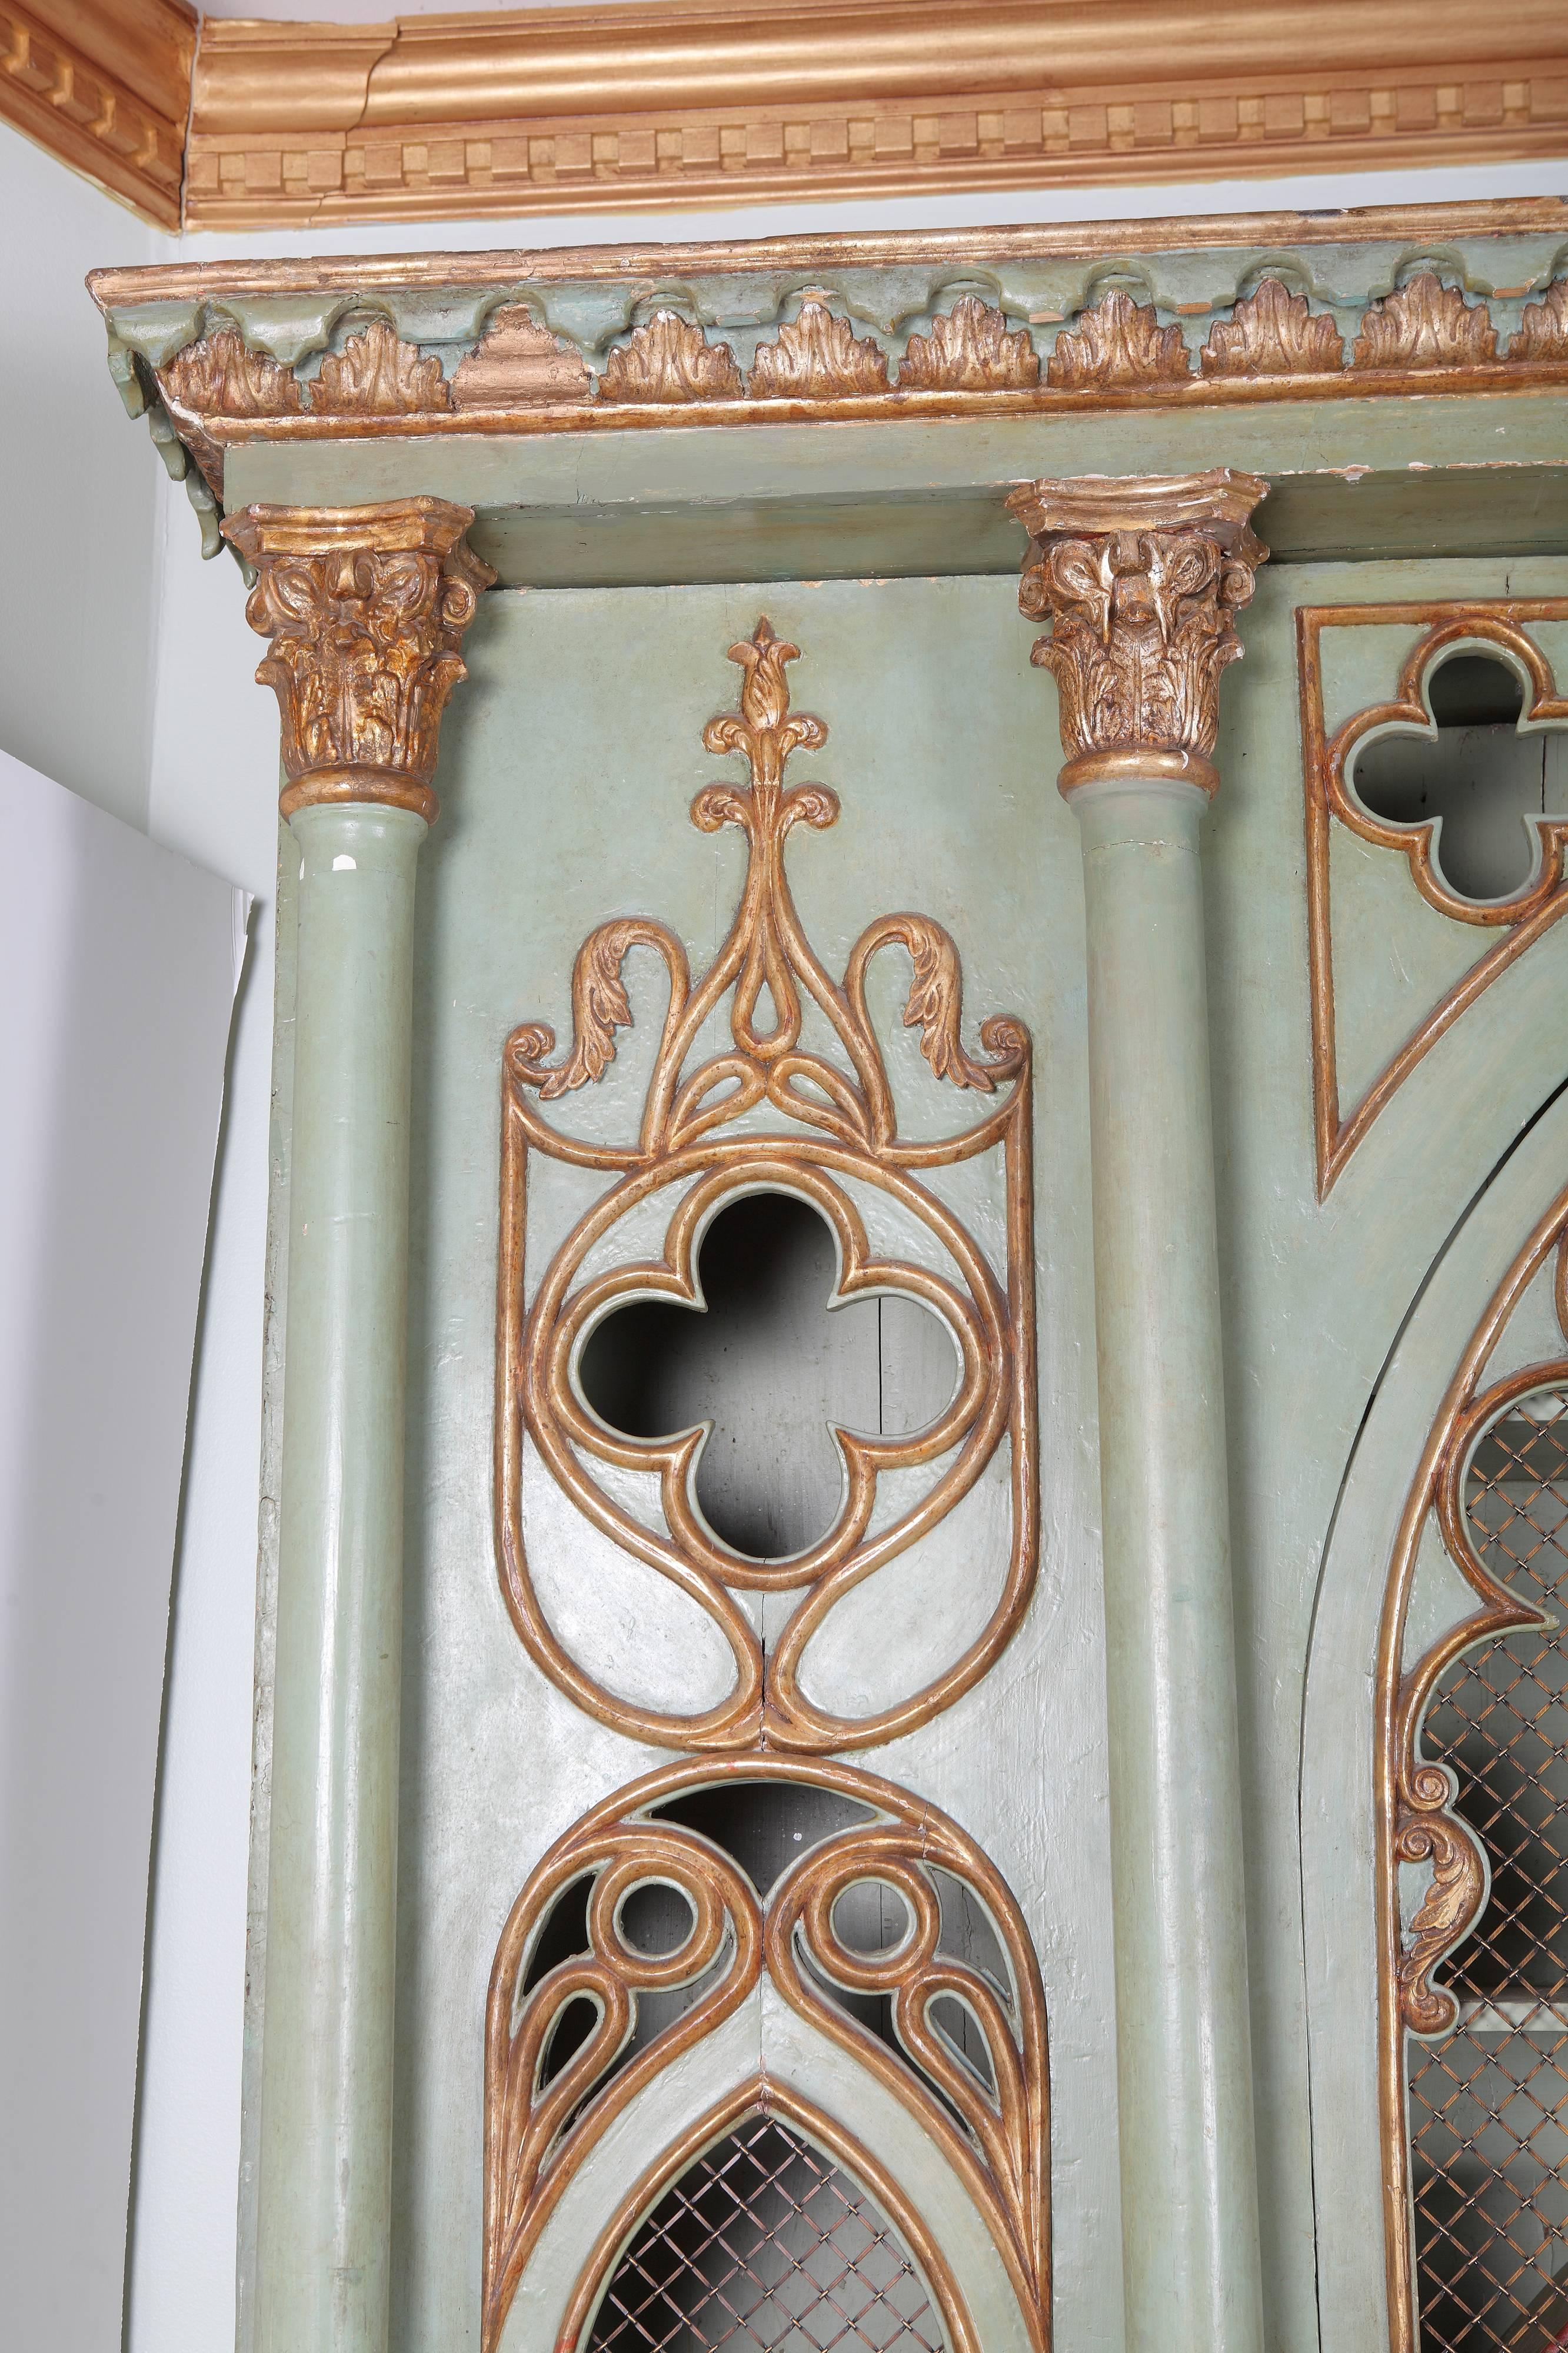 The cabinet exhibits a molded, out-swept leaf carved cornice above Gothic arch shaped grilled doors and trefoil carvings. The cabinet doors are divided and flanked by Corinthian column pilasters which rest on a paneled base with breakfront outline